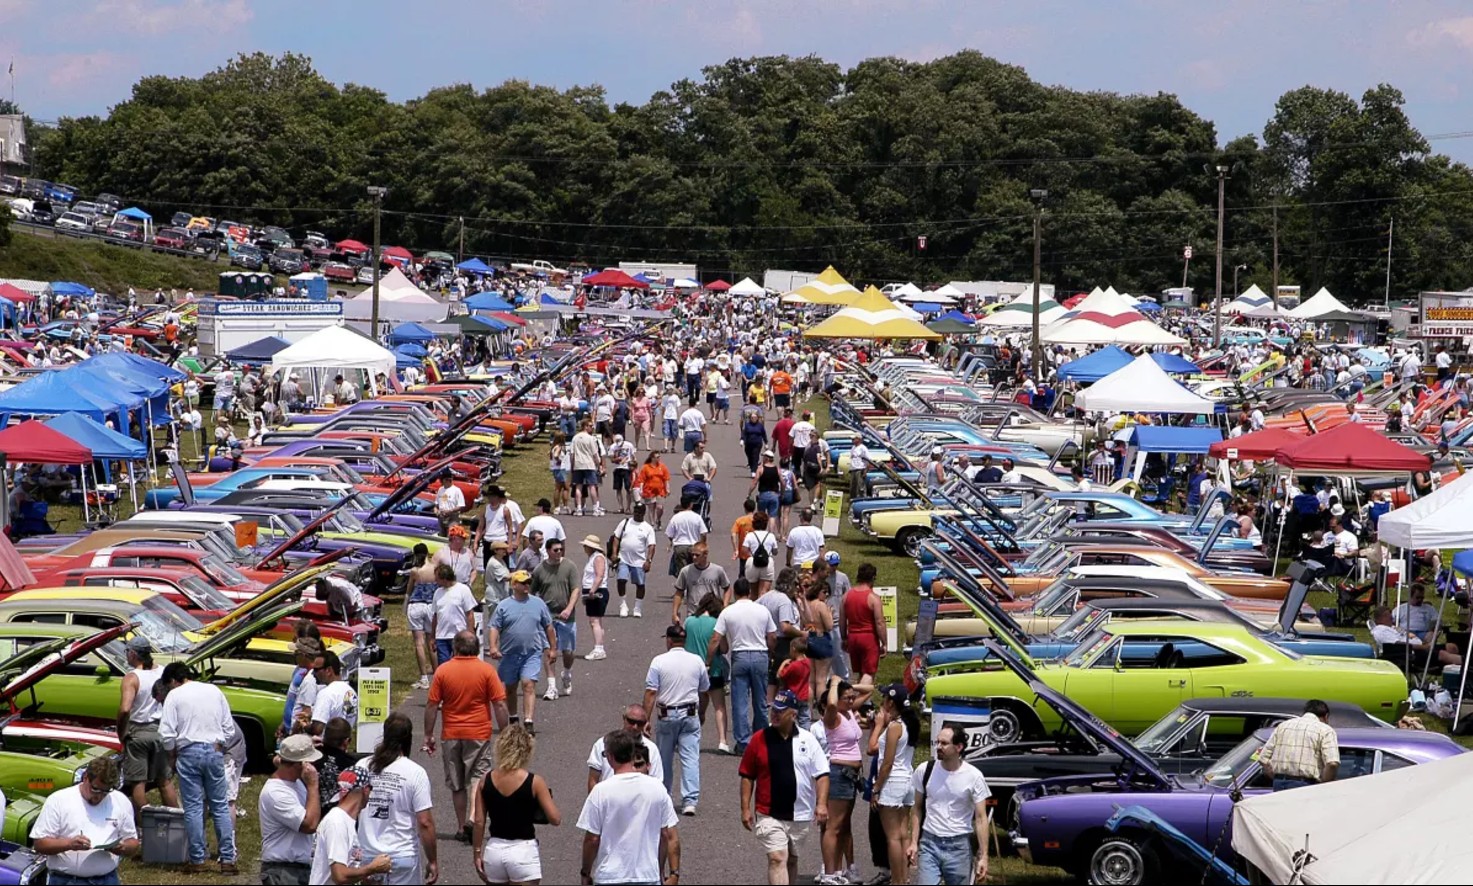 Giant Carlisle swap meet, toptier concours cars and events